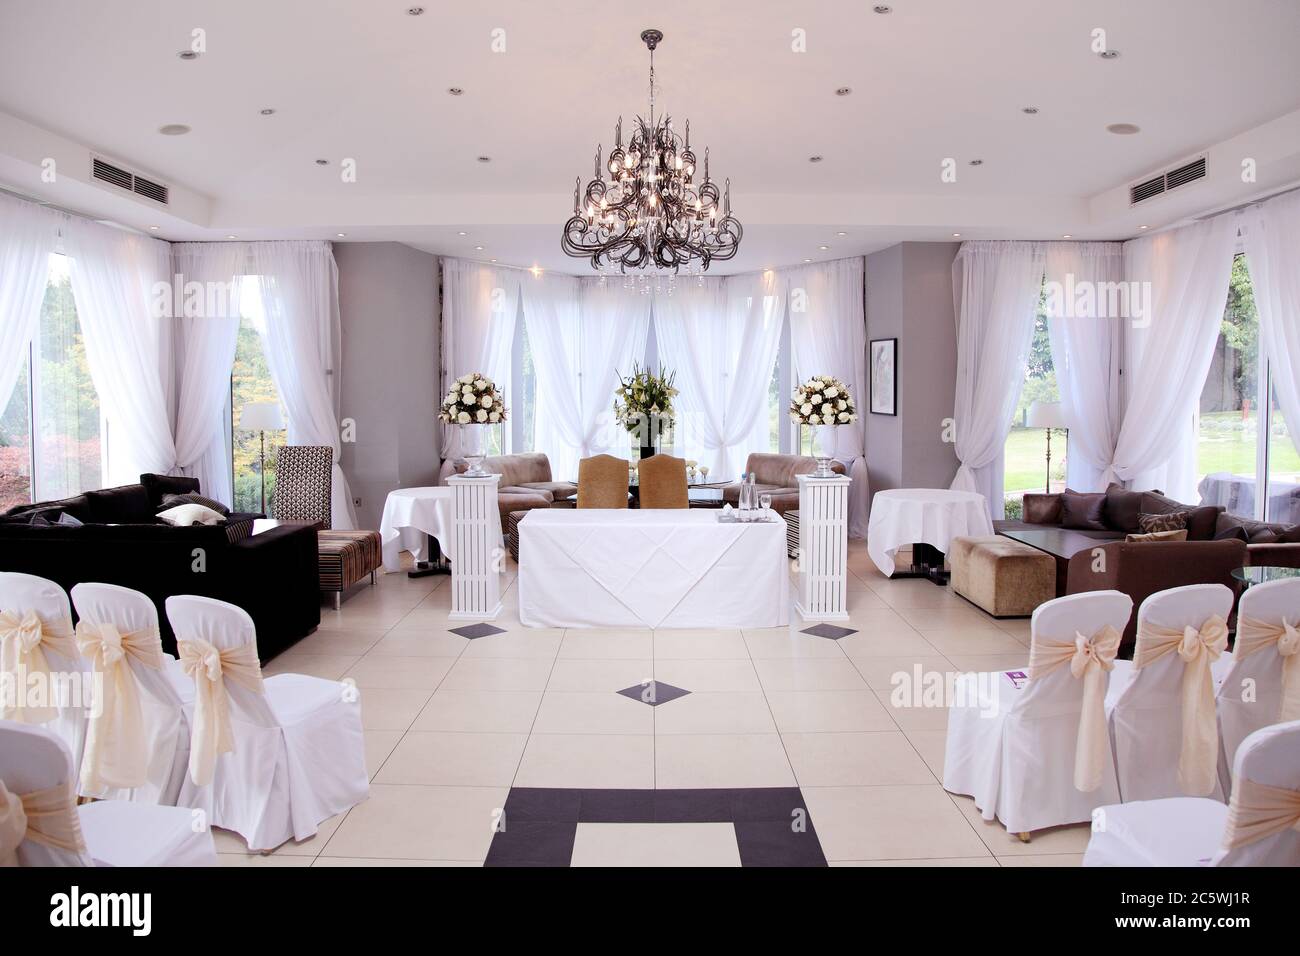 Empty closed wedding venue ceremony room or registry office featuring striking modern chandeliers. Stock Photo